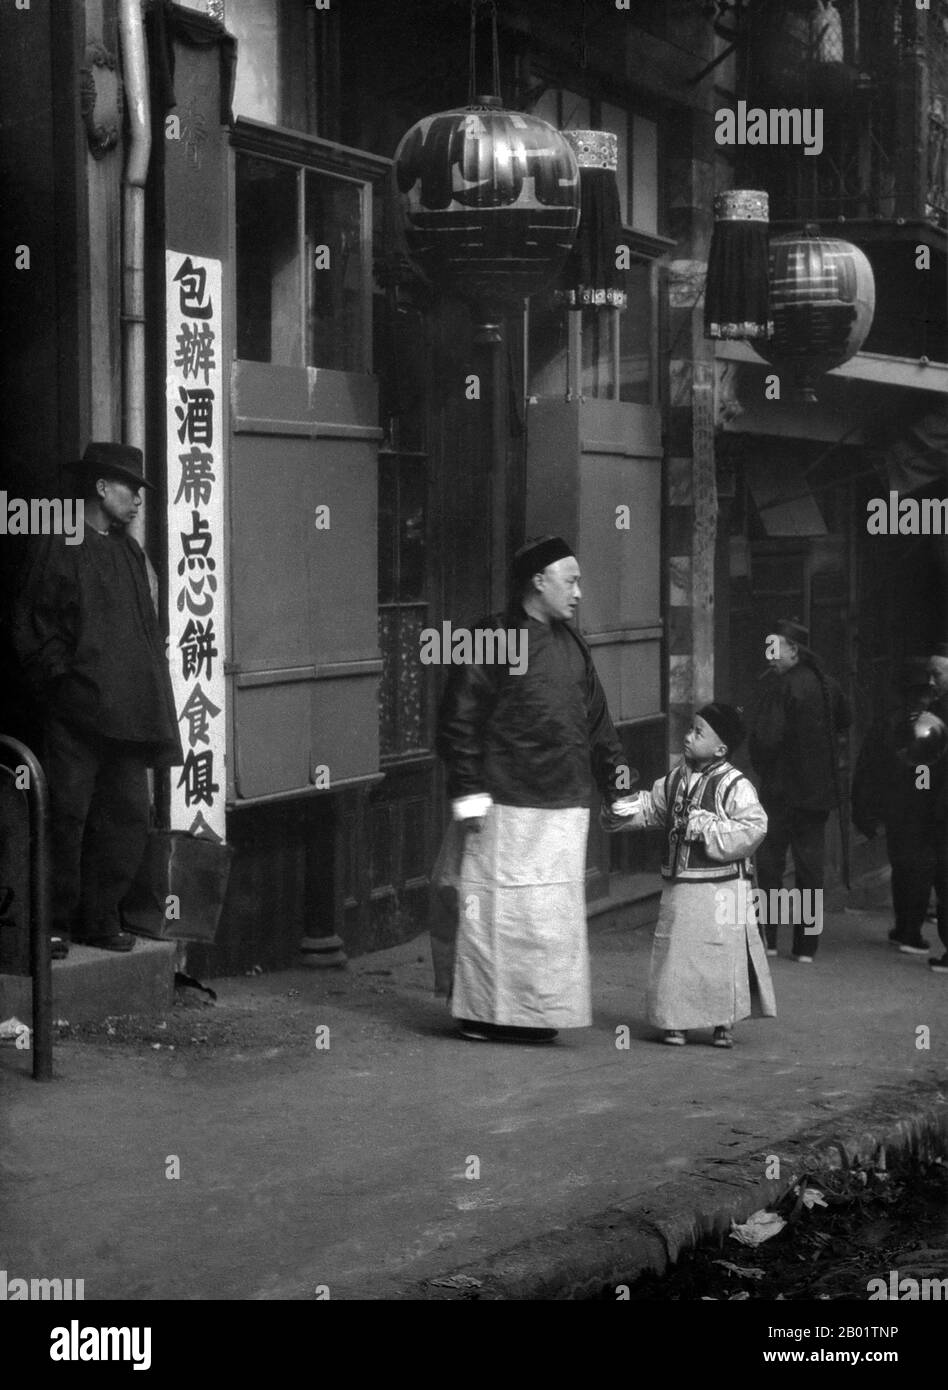 USA: Father and son outside a Chinese restaurant, San Francisco Chinatown. Photo by Arnold Genthe (1869-1942), c. 1900.  San Francisco's Chinatown was the port of entry for early Hoisanese and Zhongshanese Chinese immigrants from the Guangdong province of southern China from the 1850s to the 1900s. The area was the one geographical region deeded by the city government and private property owners which allowed Chinese persons to inherit and inhabit dwellings within the city.  The majority of these Chinese shopkeepers, restaurant owners and hired workers in San Francisco were mainly Hoisanese. Stock Photo